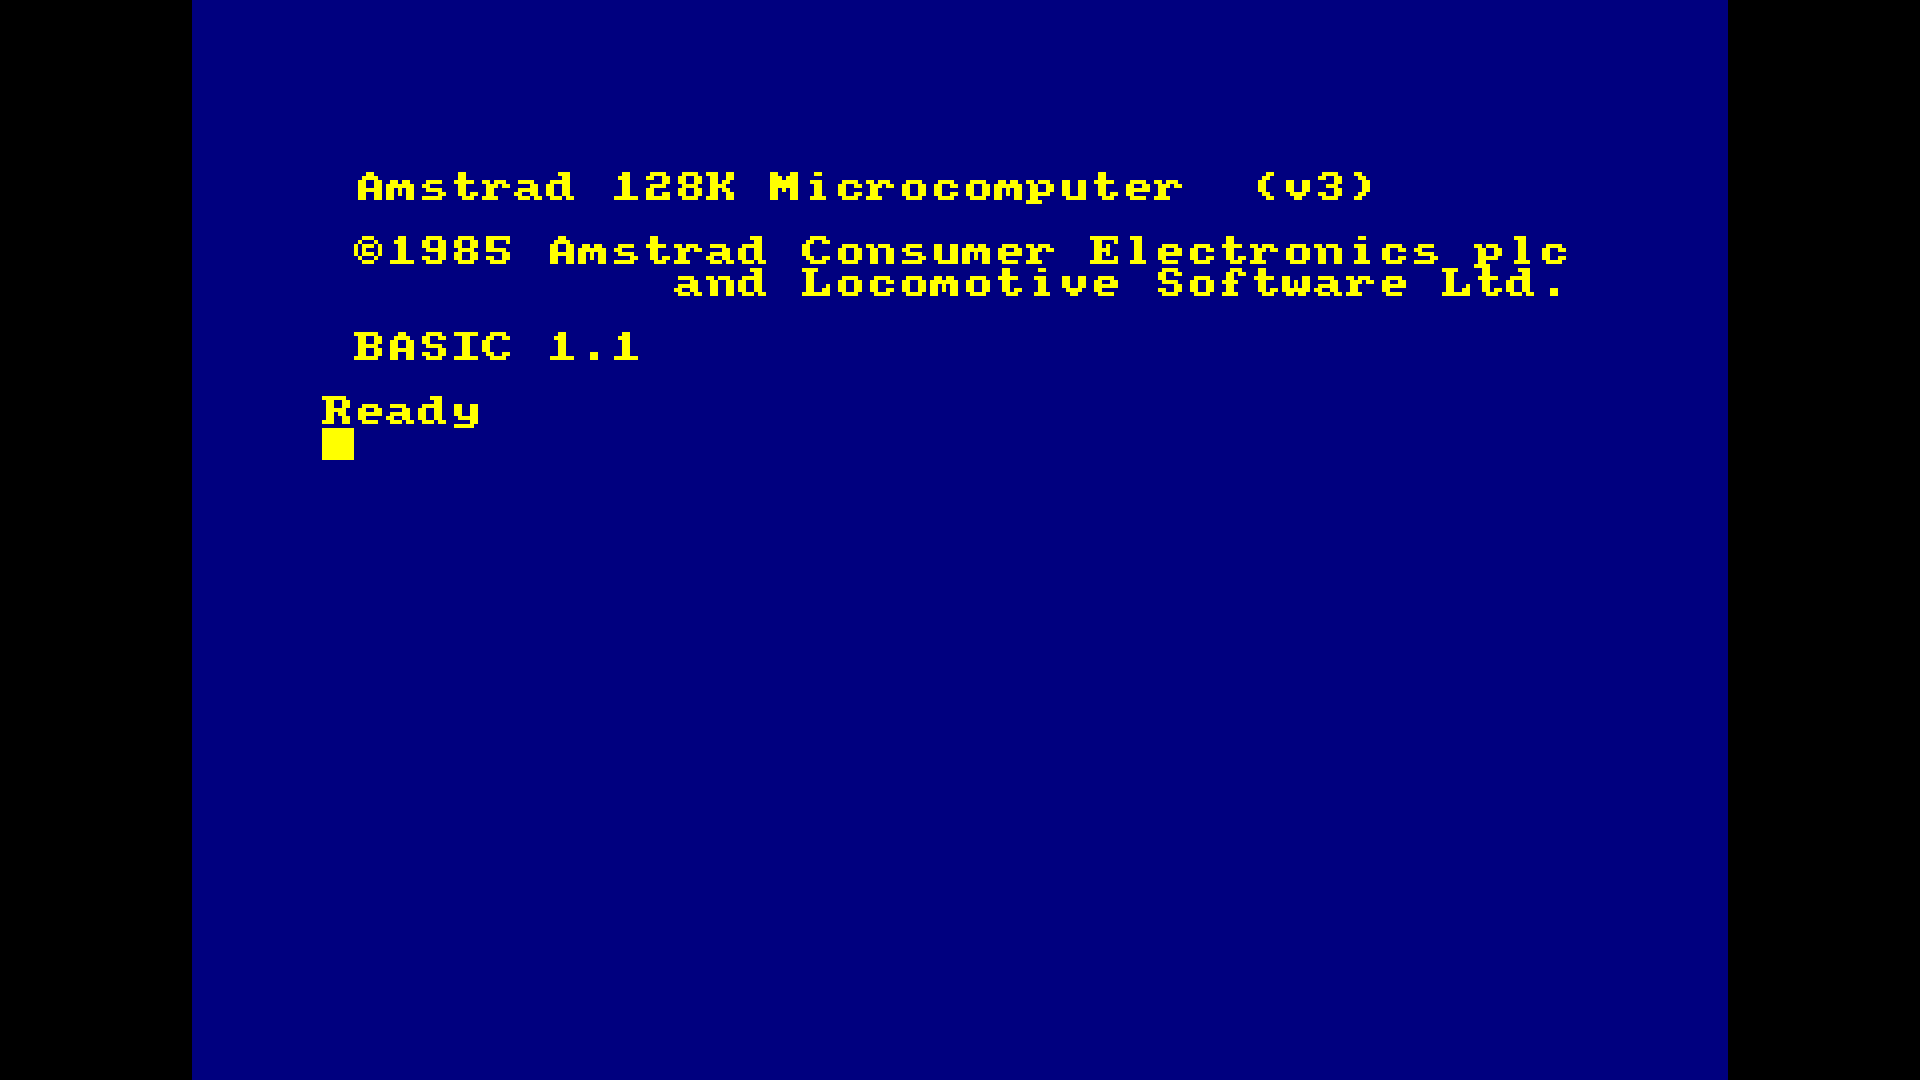 images/gallery/amstrad.png